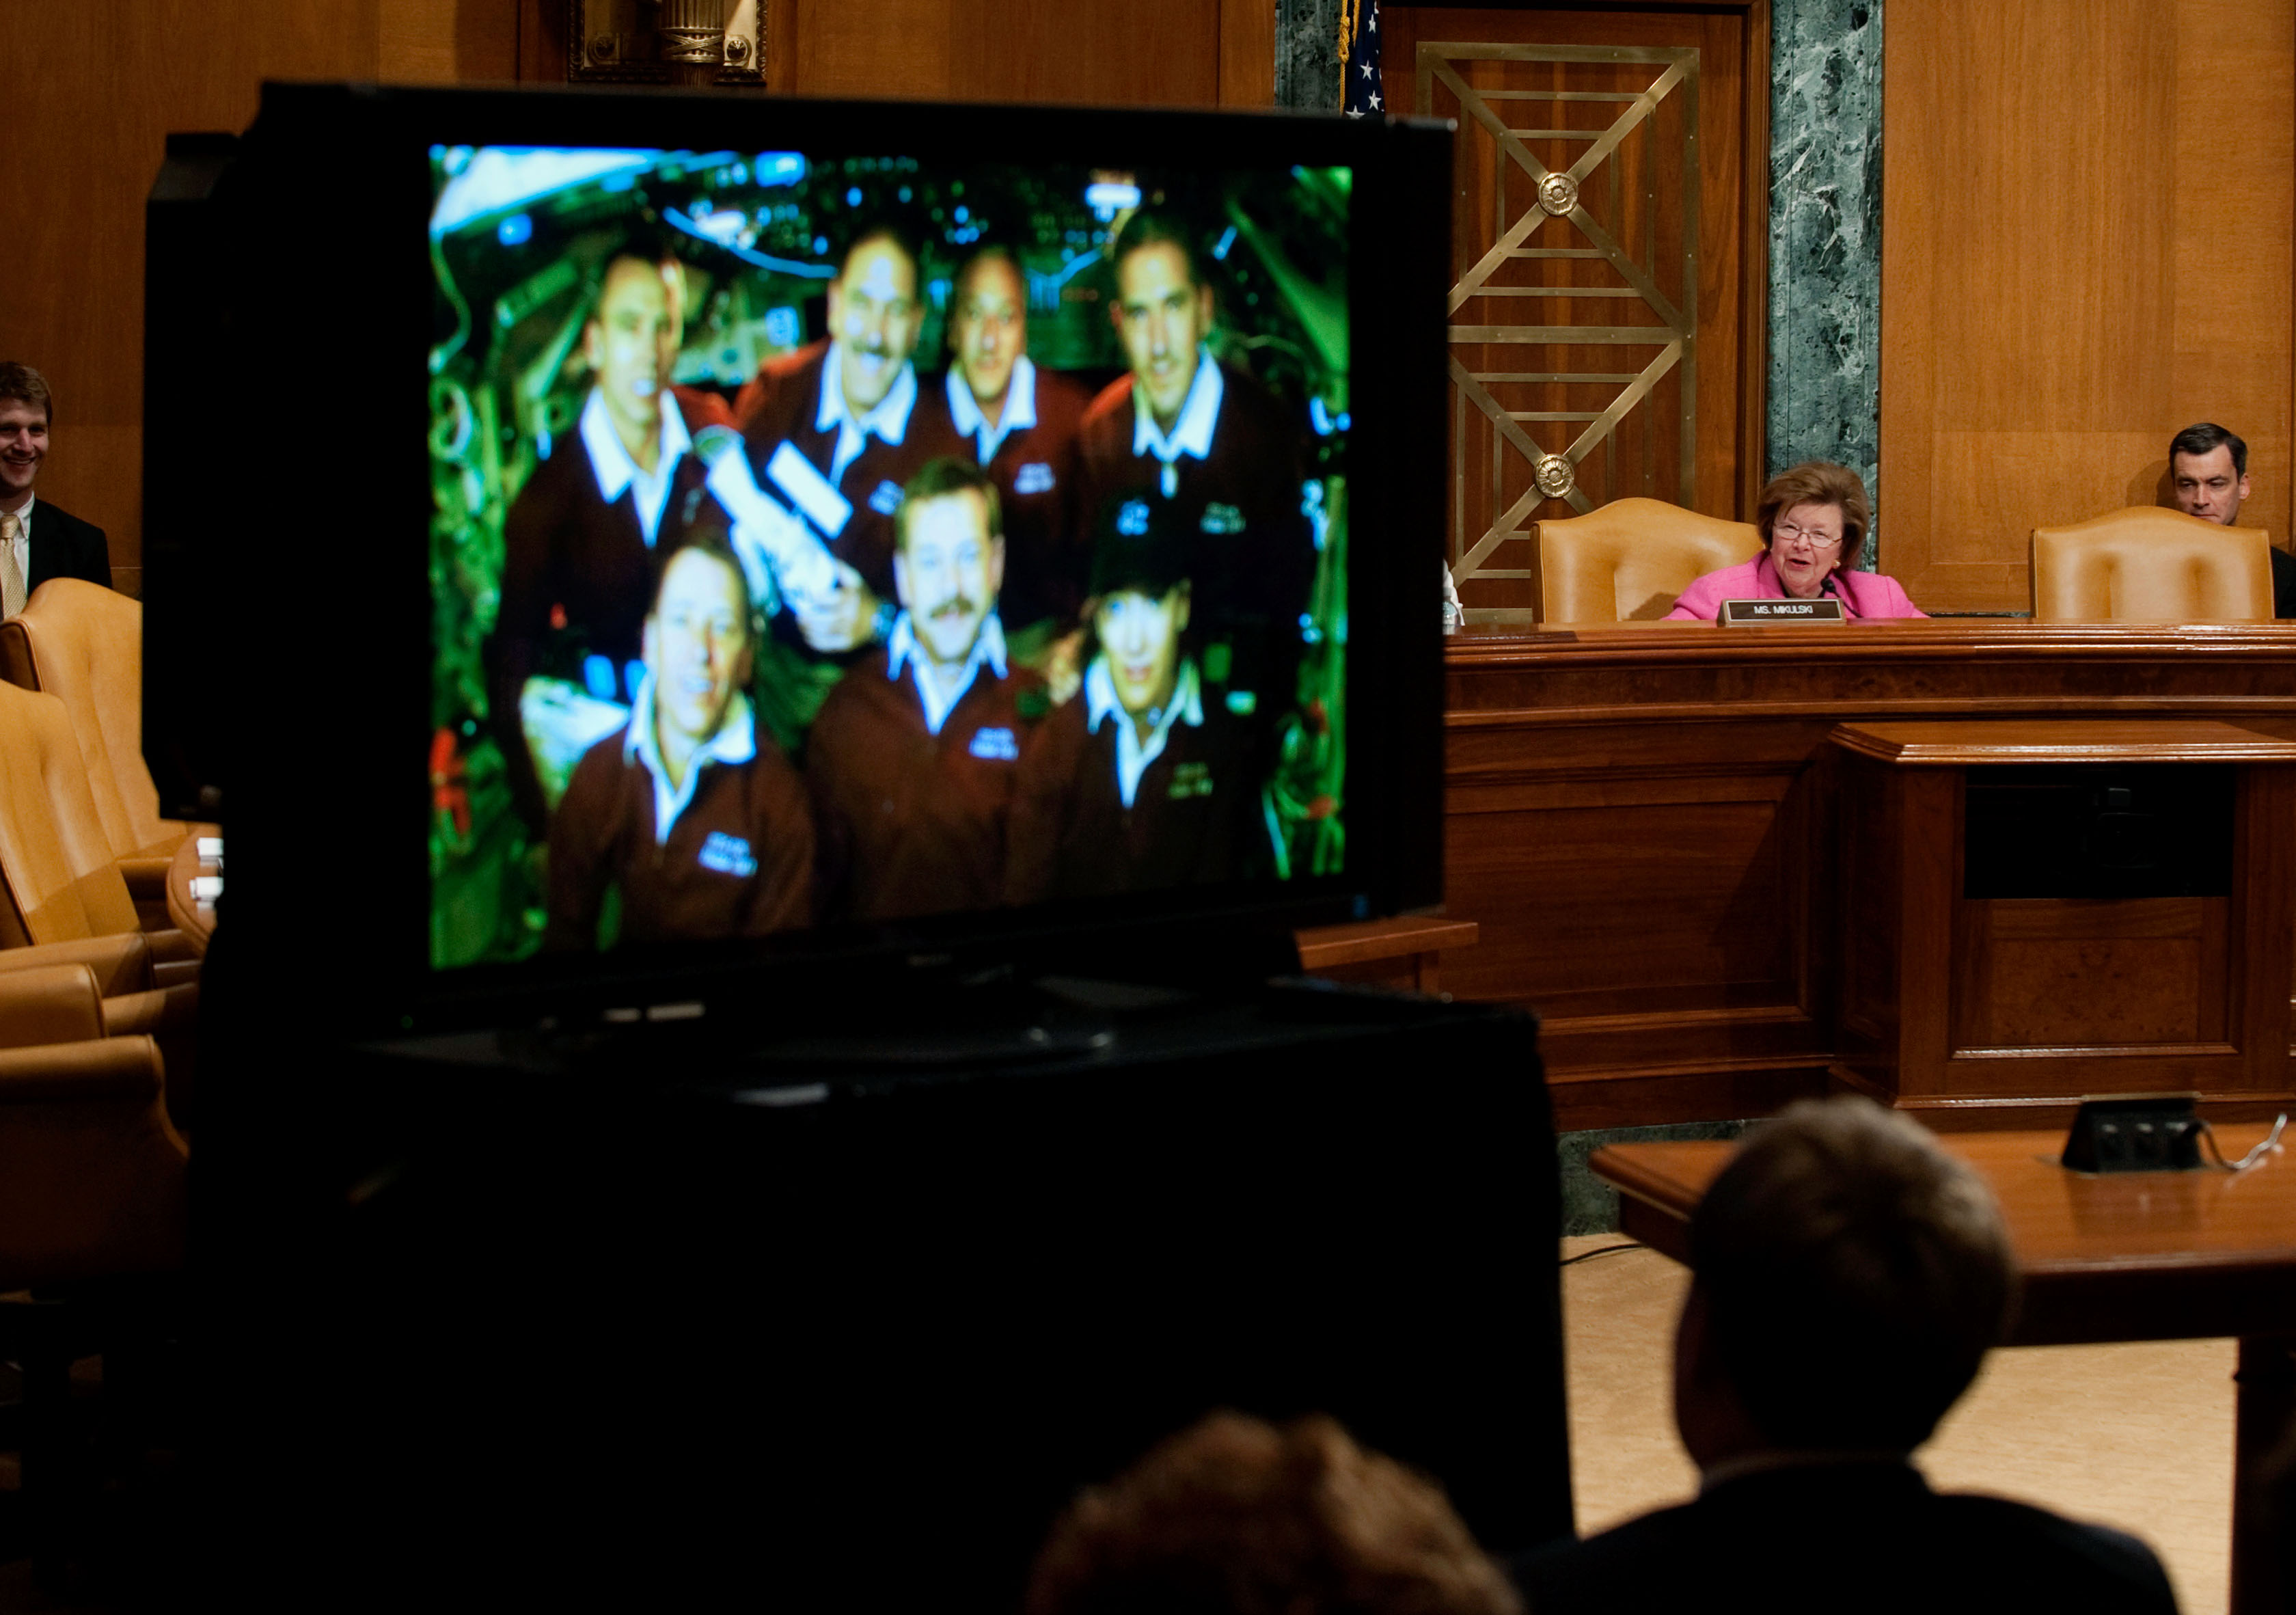 The STS-125 crew provides testimony via television to a Congressional committee